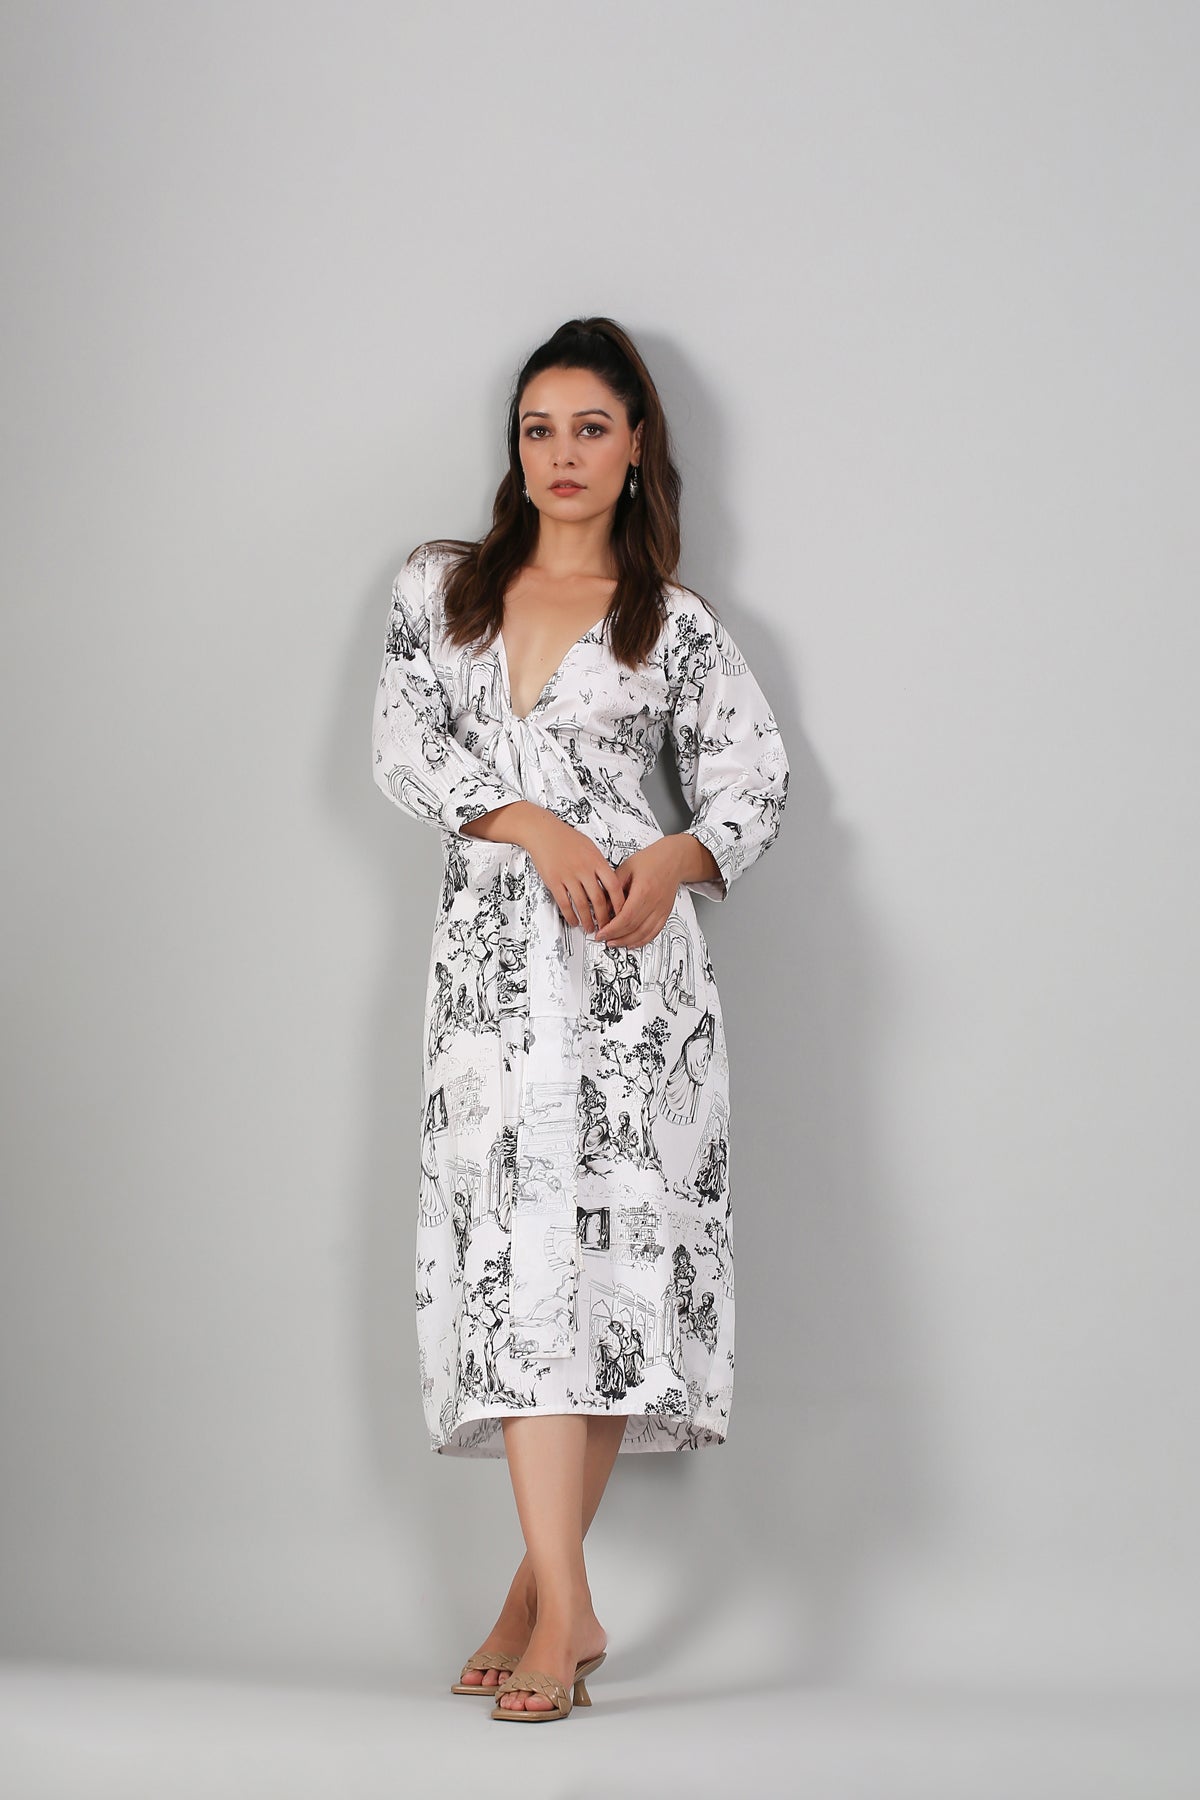 White Mini Dress at Kamakhyaa by MOH-The Eternal Dhaga. This item is Casual Wear, Cotton, Mini Dresses, Moh-The eternal Dhaga, Natural, Prints, Regular Fit, White, Womenswear